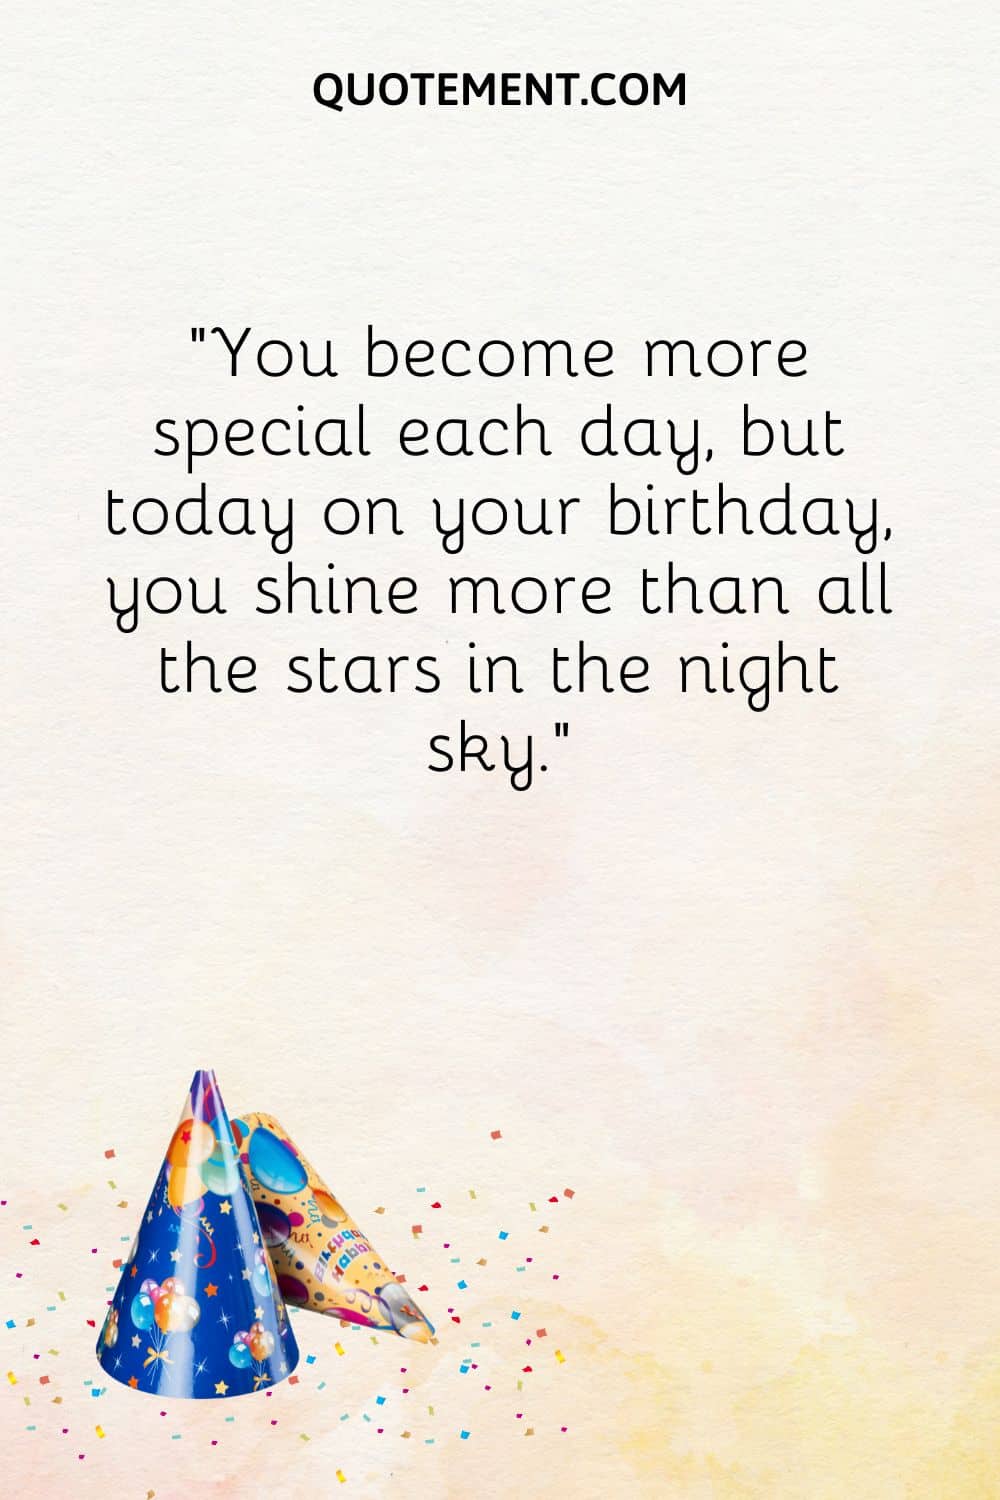 “You become more special each day, but today on your birthday, you shine more than all the stars in the night sky.”